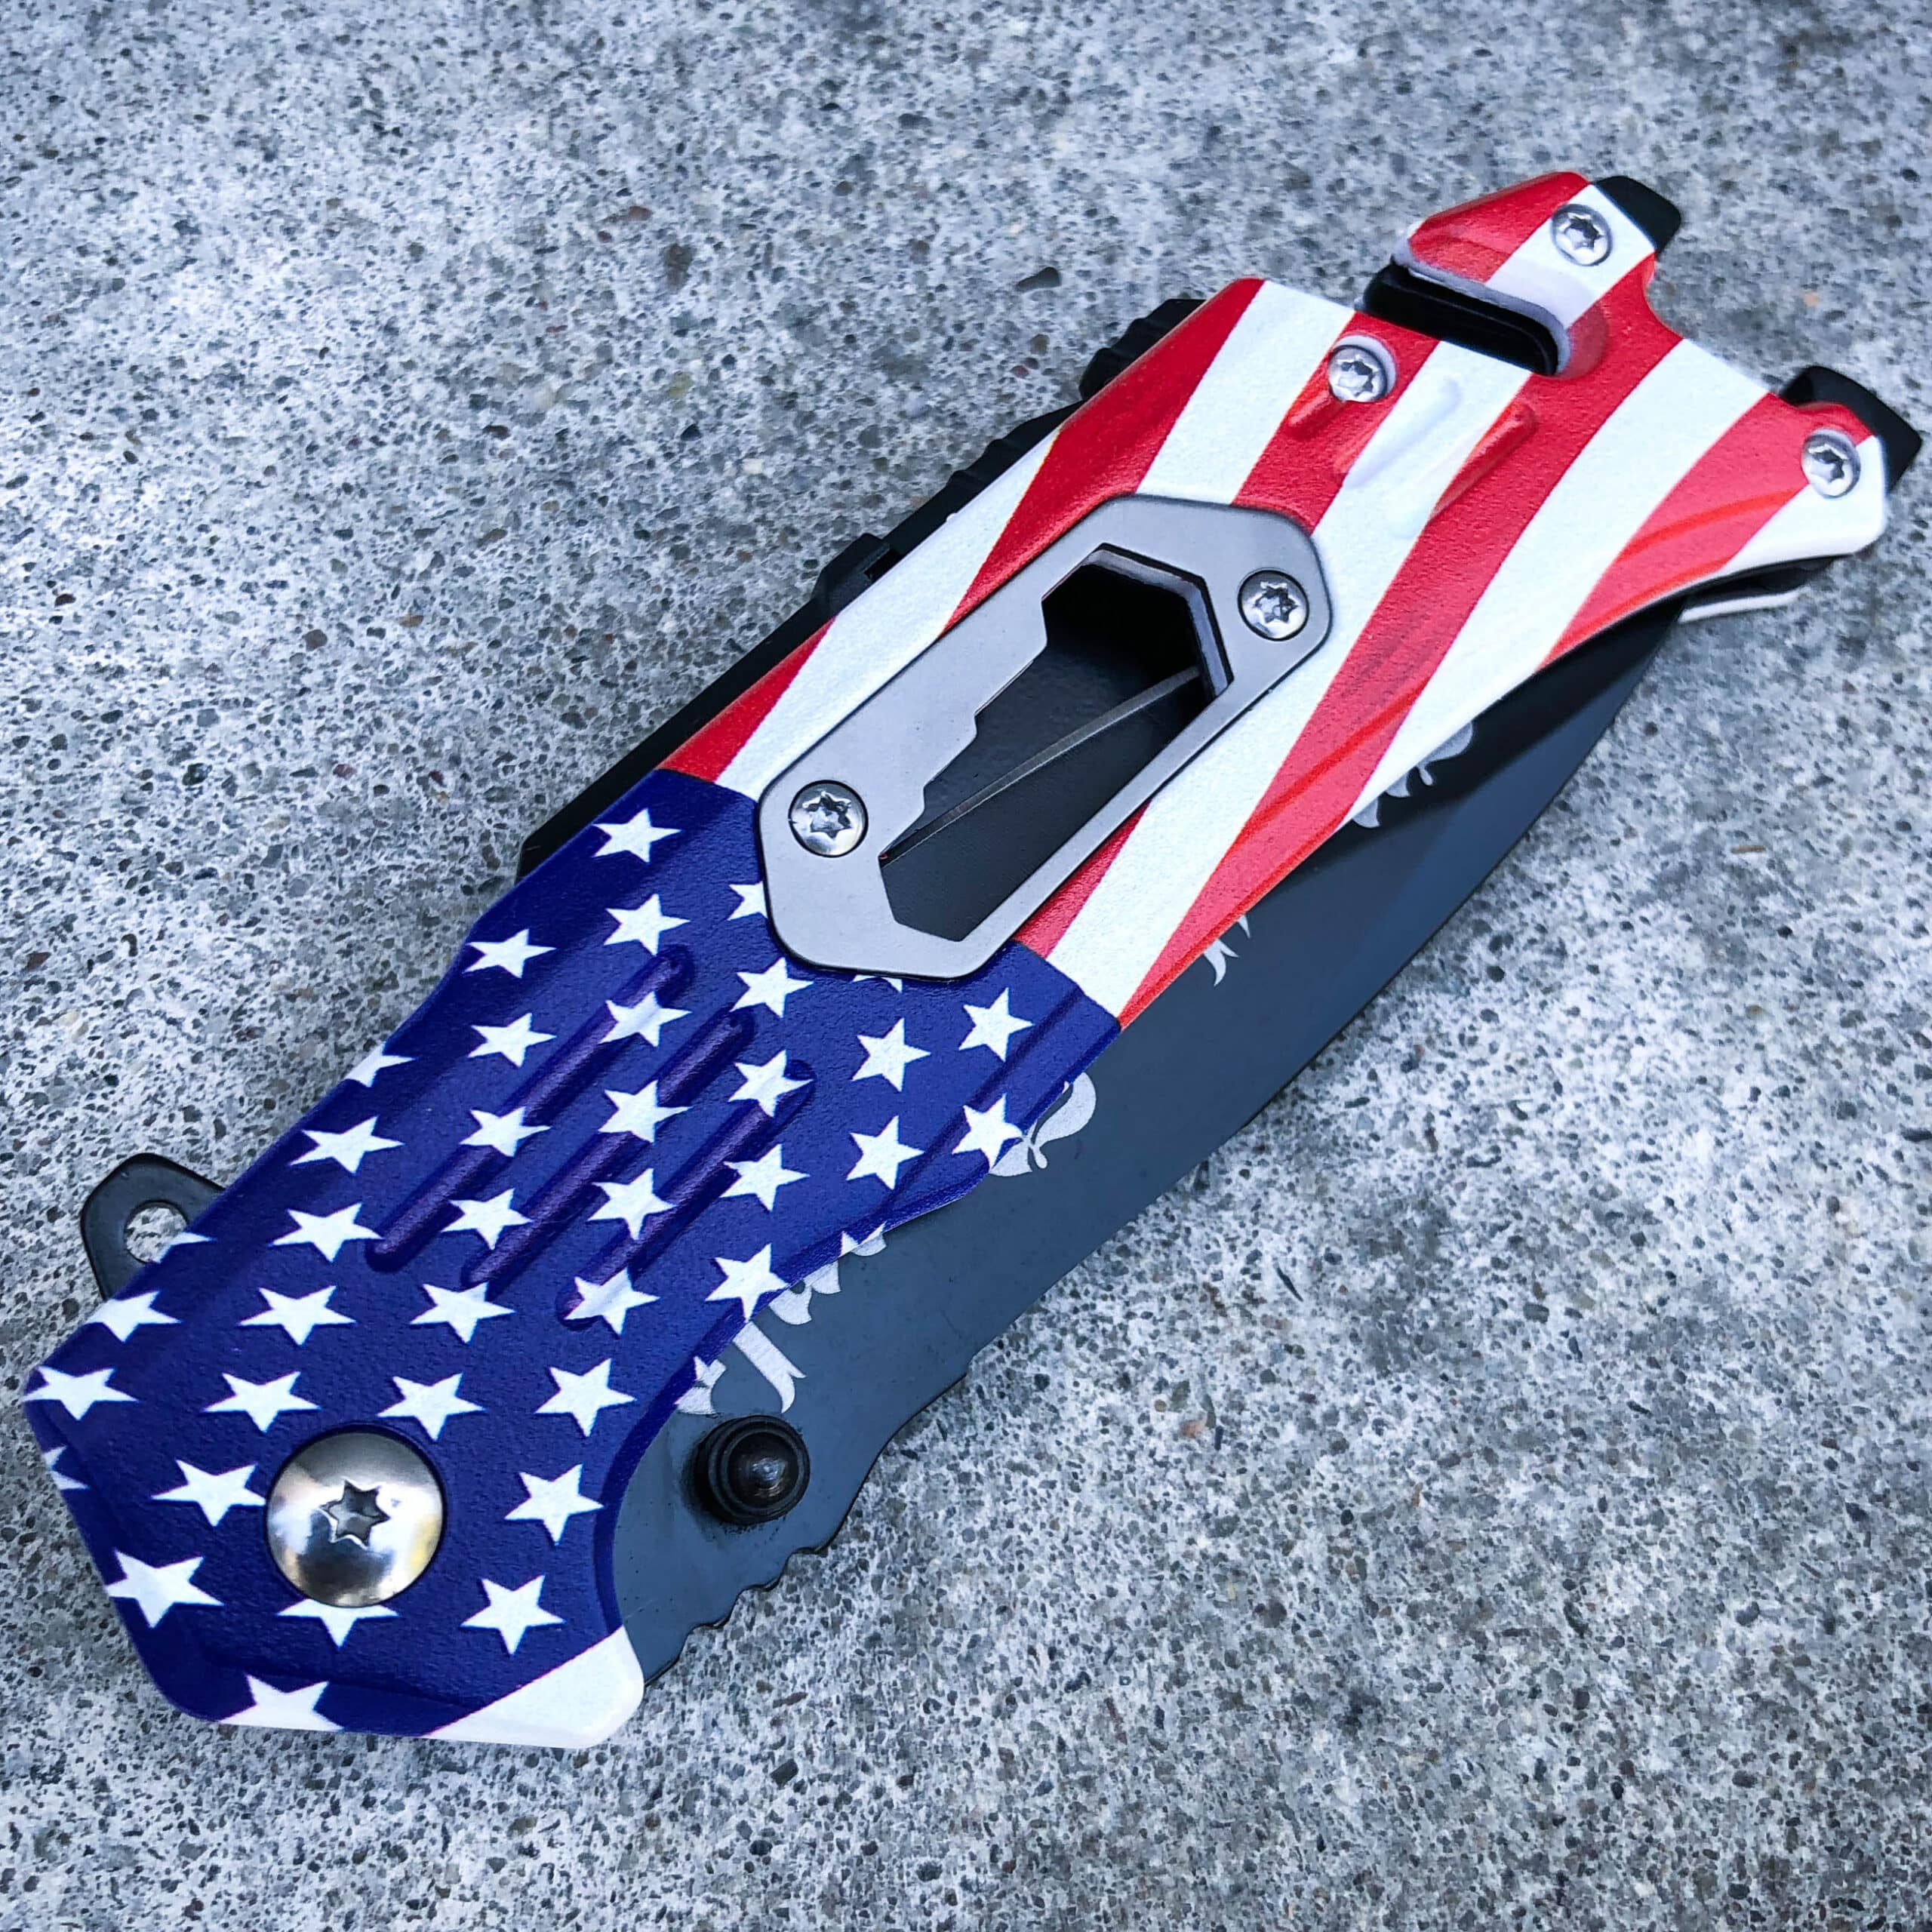 8" AMERICAN FLAG Knife USA Tactical Spring OPEN Assisted Folding Pocket Rescue Knife Multi Tool